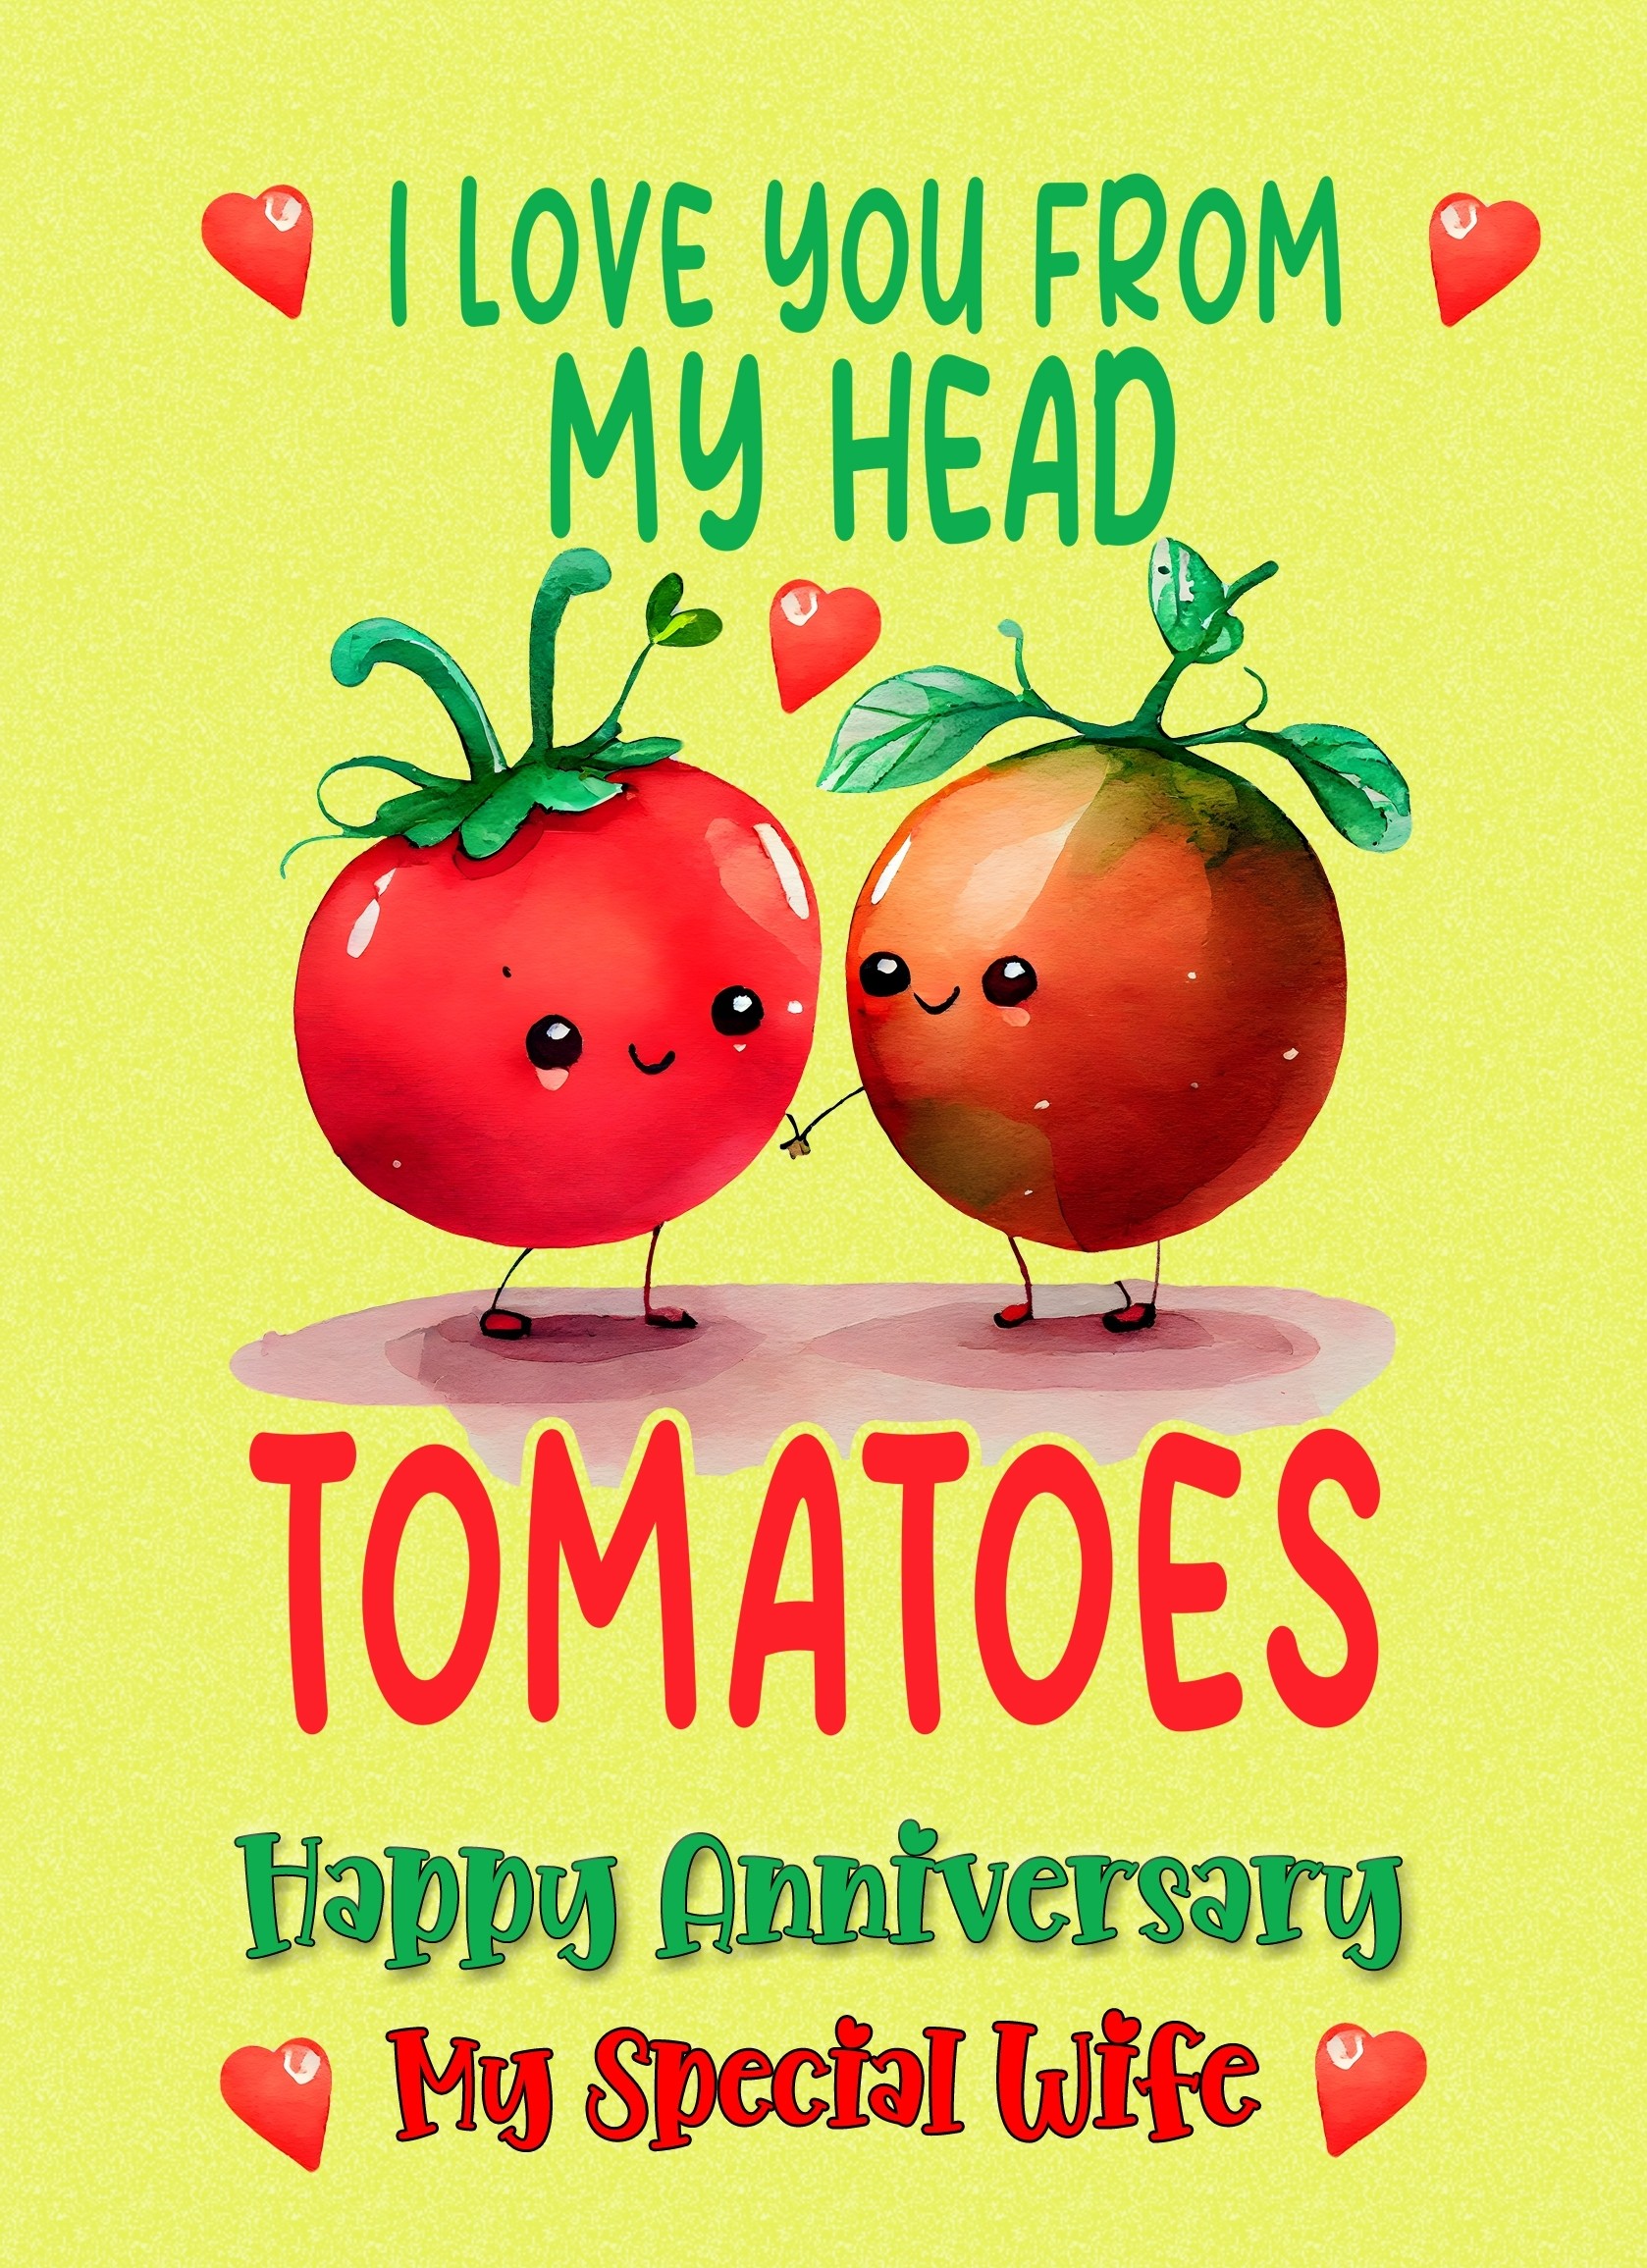 Funny Pun Romantic Anniversary Card for Wife (Tomatoes)